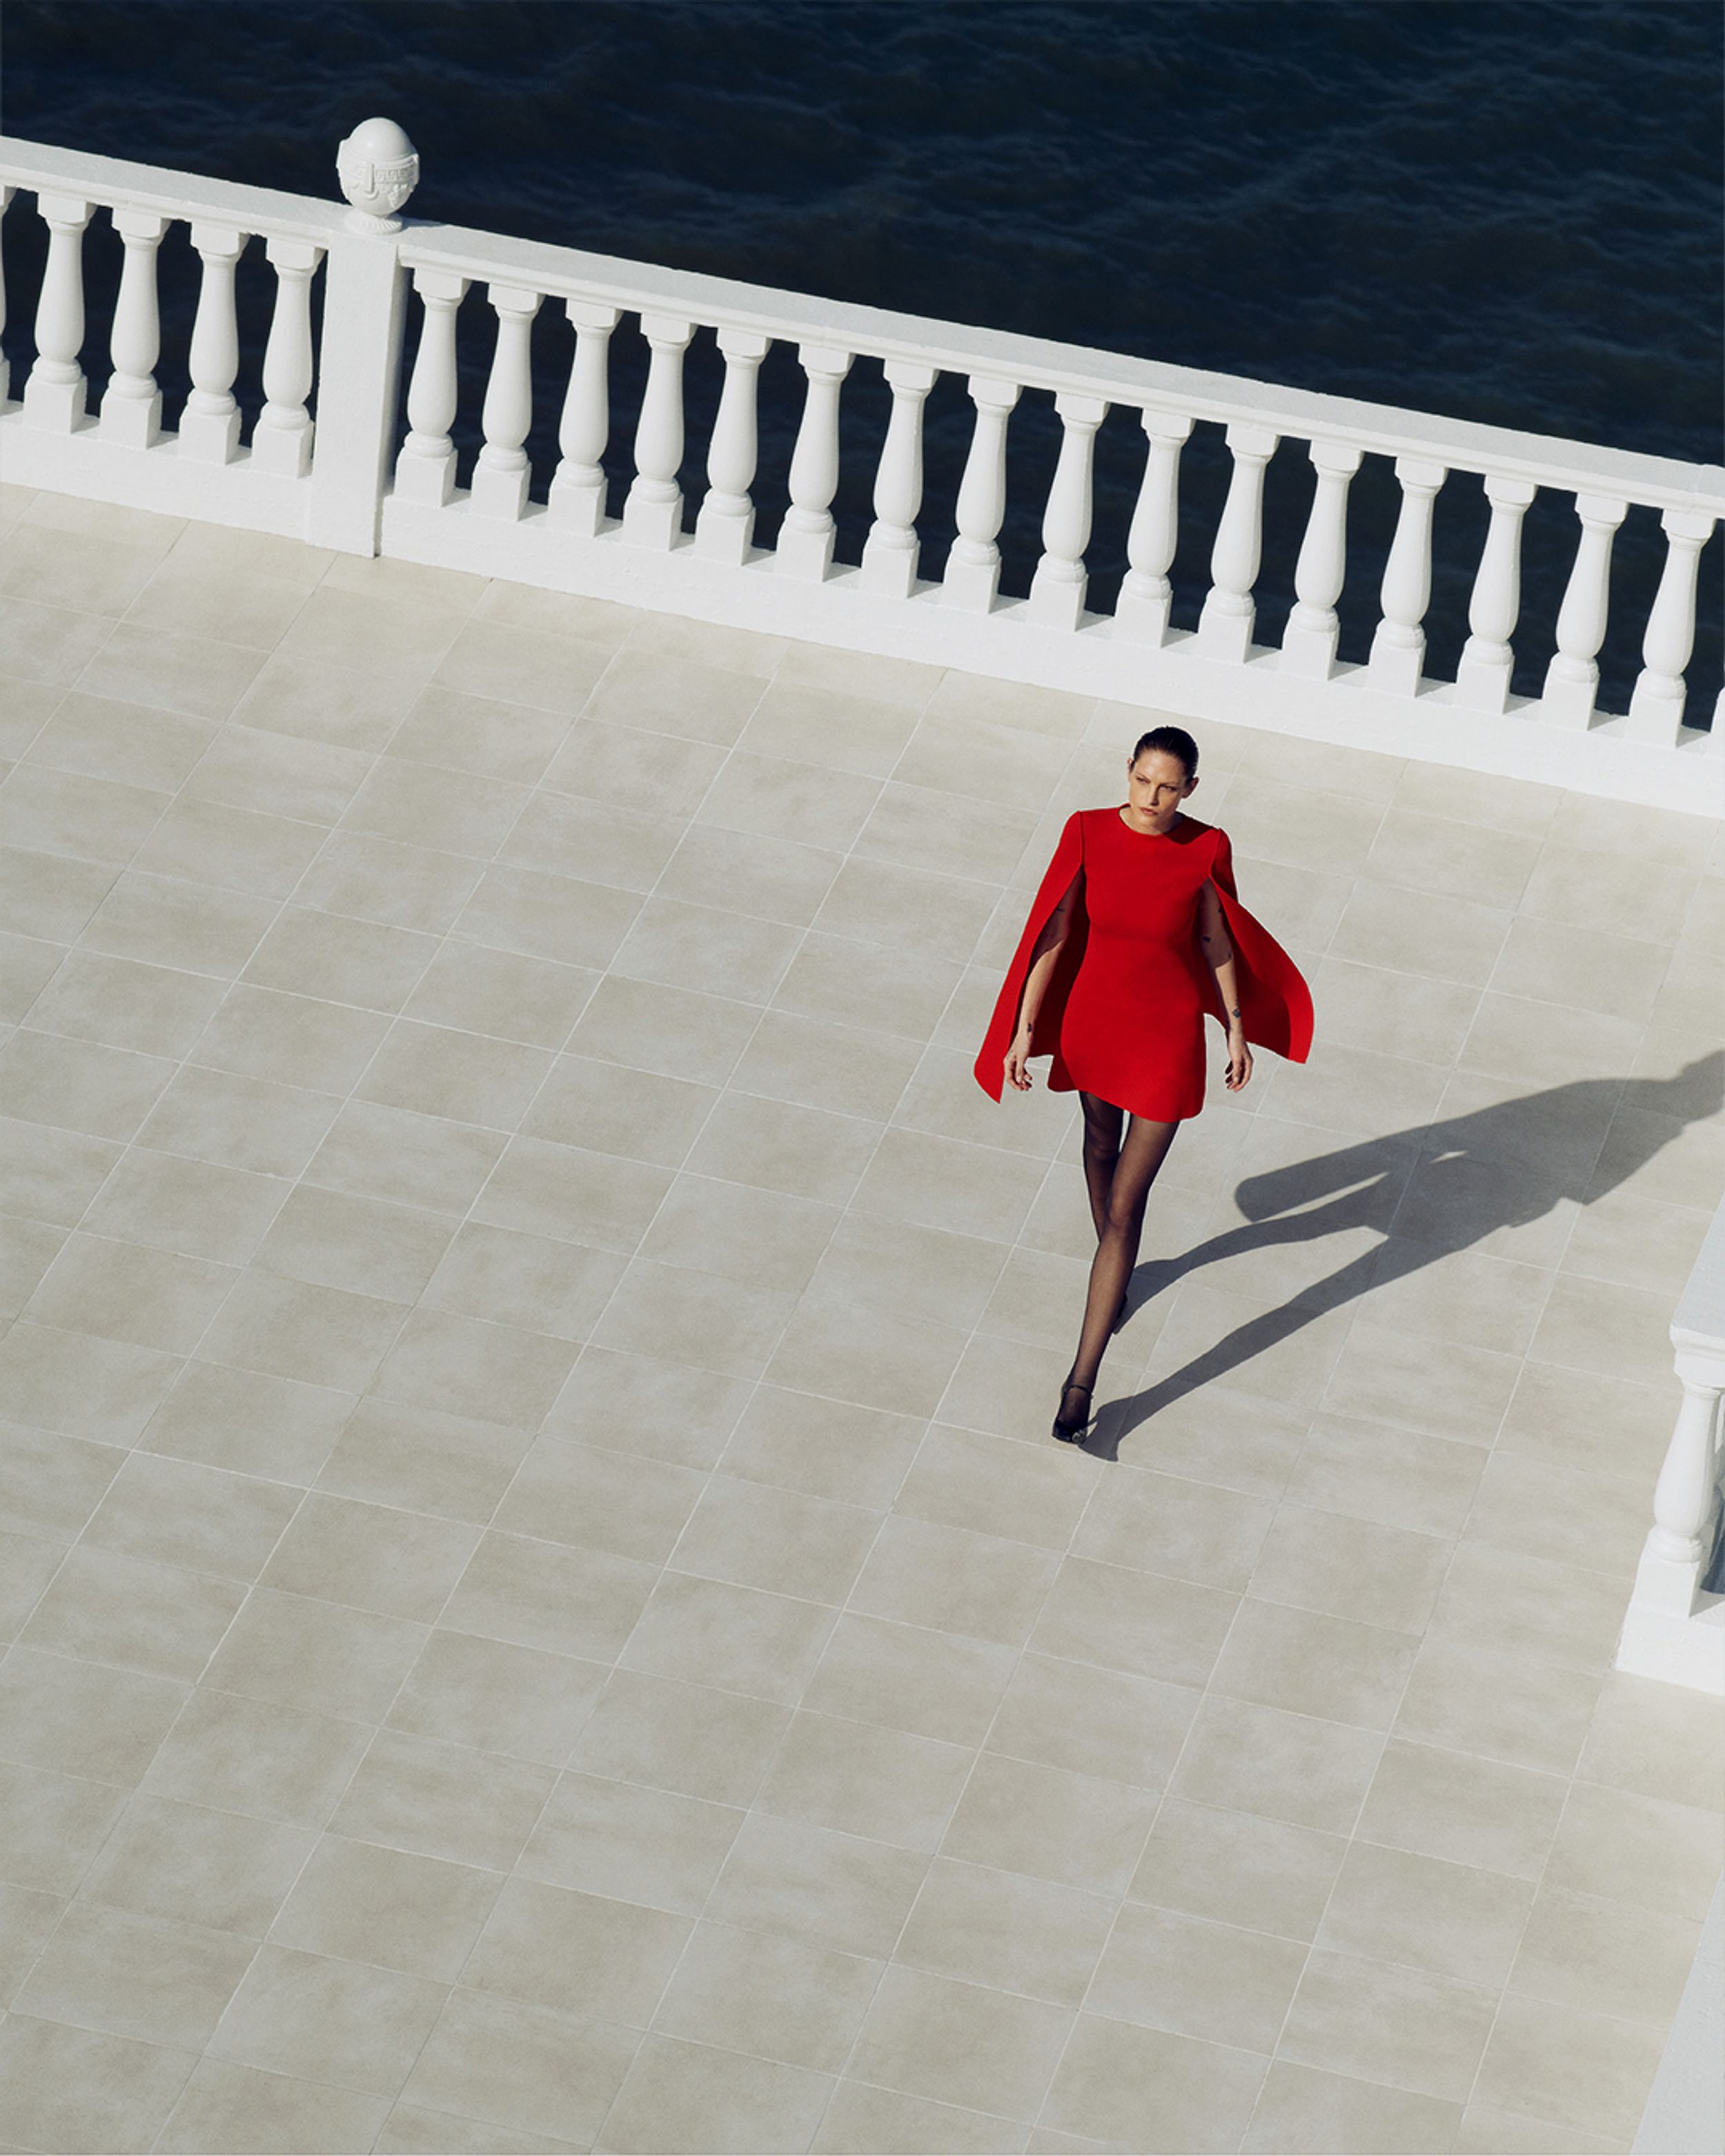 Arial view of model in Crepe Knit Red Cape Dress walking on tiled balcony